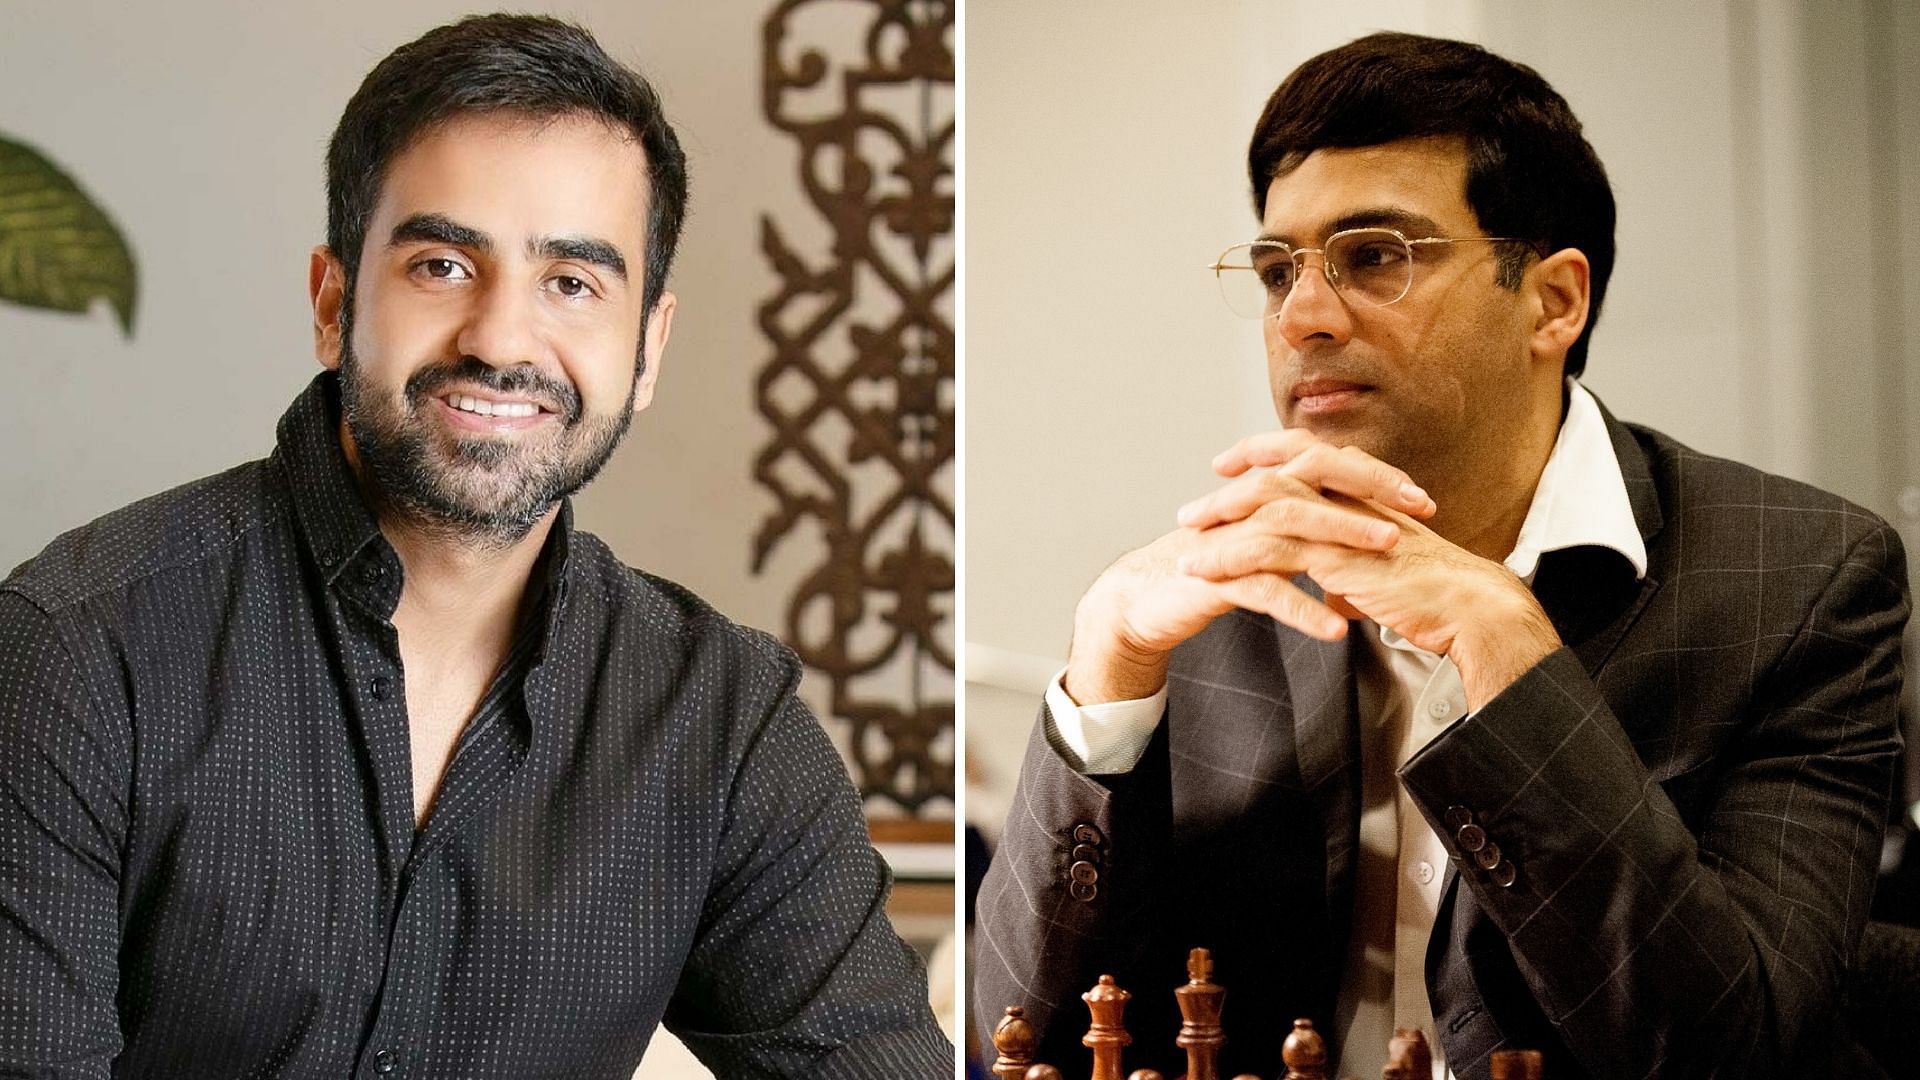 Nikhil Kamath lands in a soup after admitting to foul play in chess game versus Vishwanathan Anand.&nbsp;